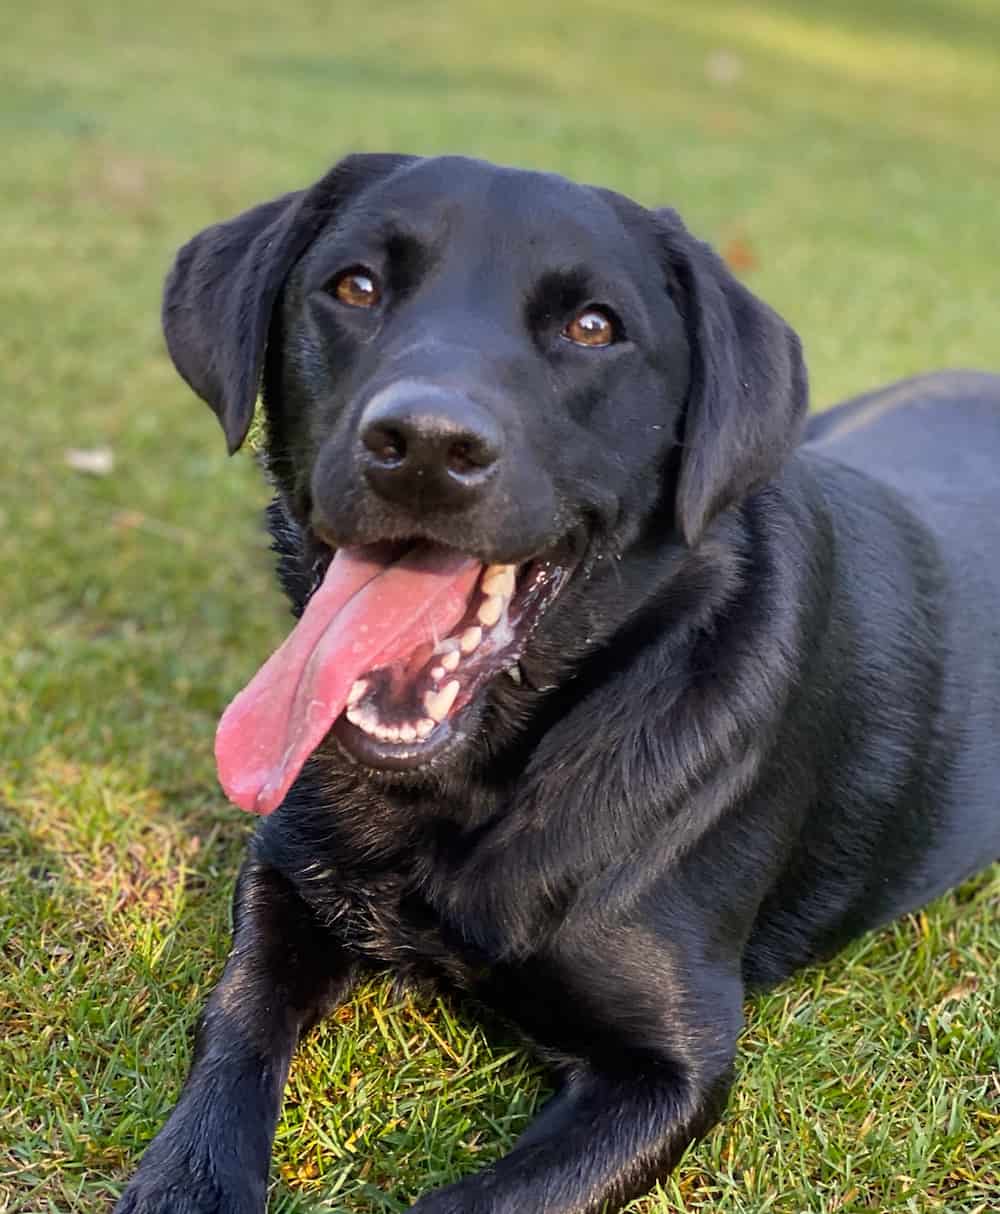 An excited black lab lets his tongue hang out while laying in the grass.